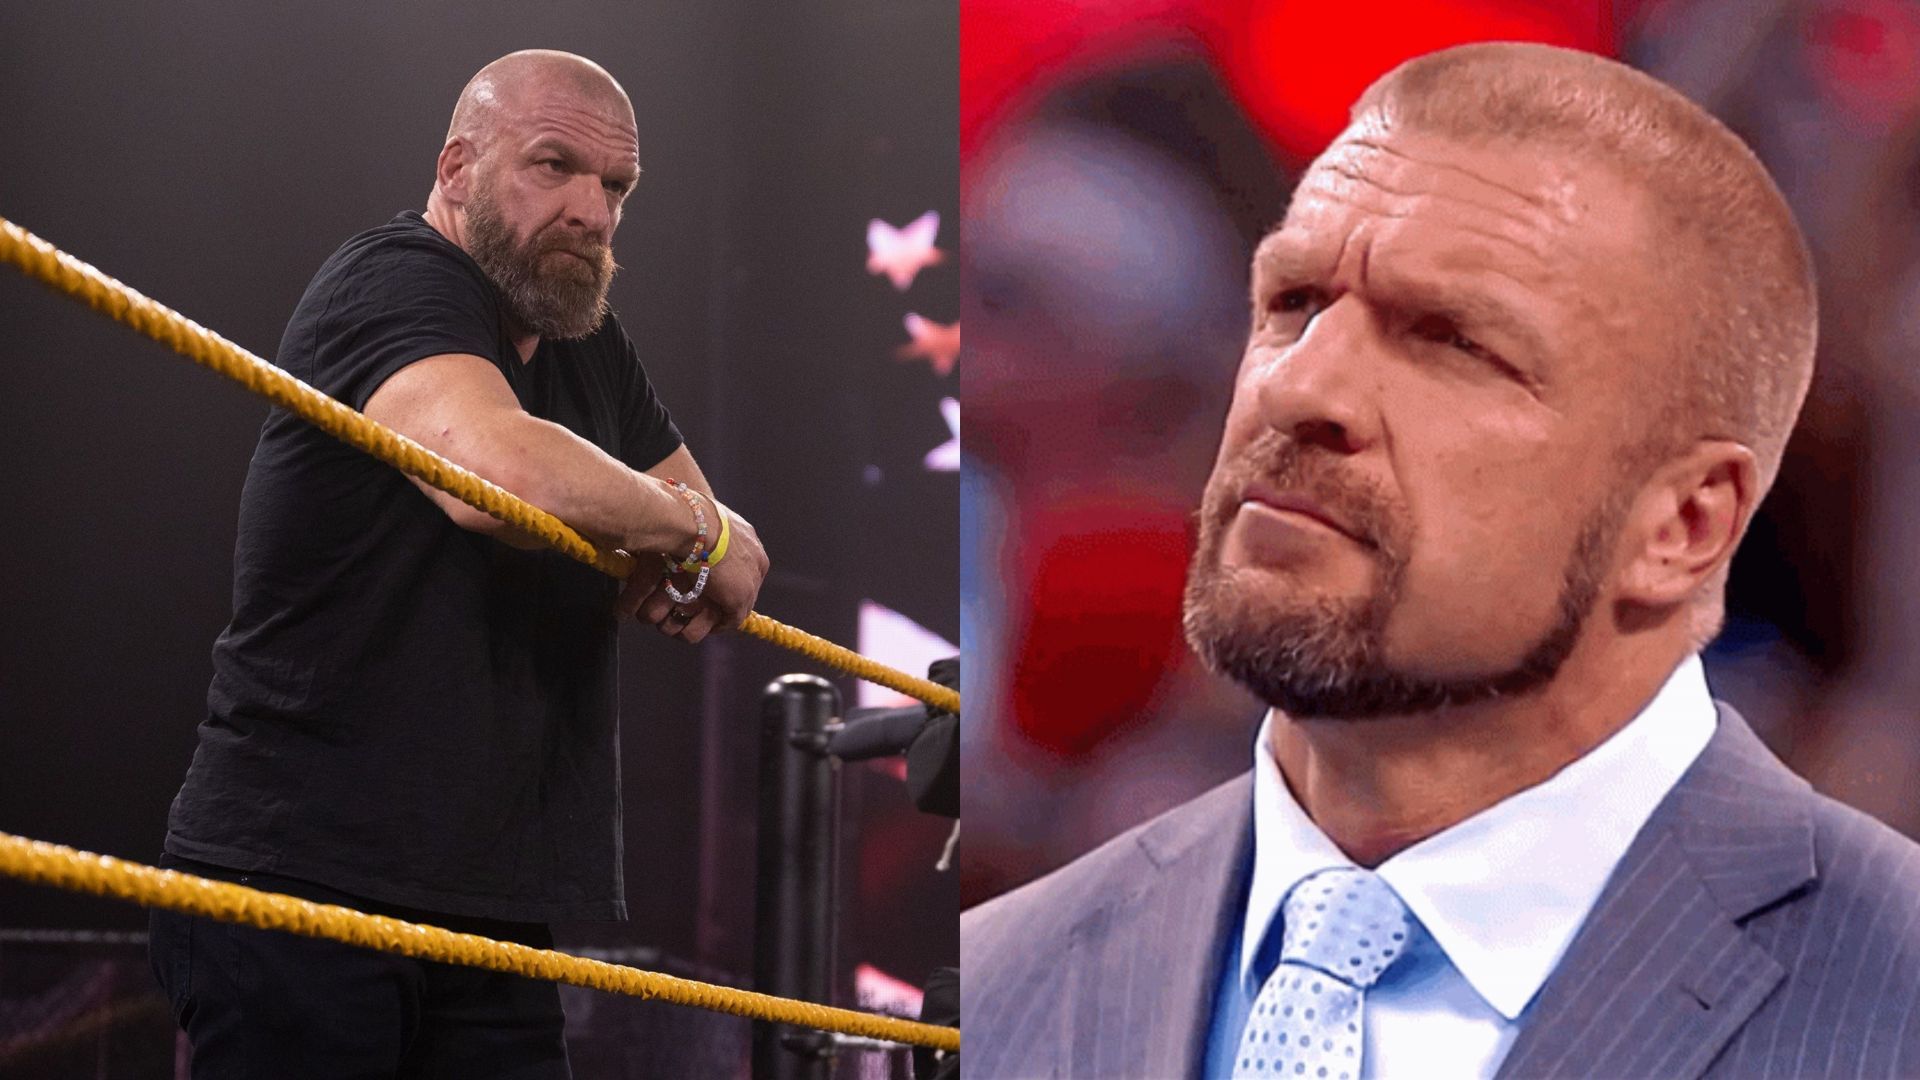 WWE Chief Content Officer Triple H has signed several superstars over the past few months